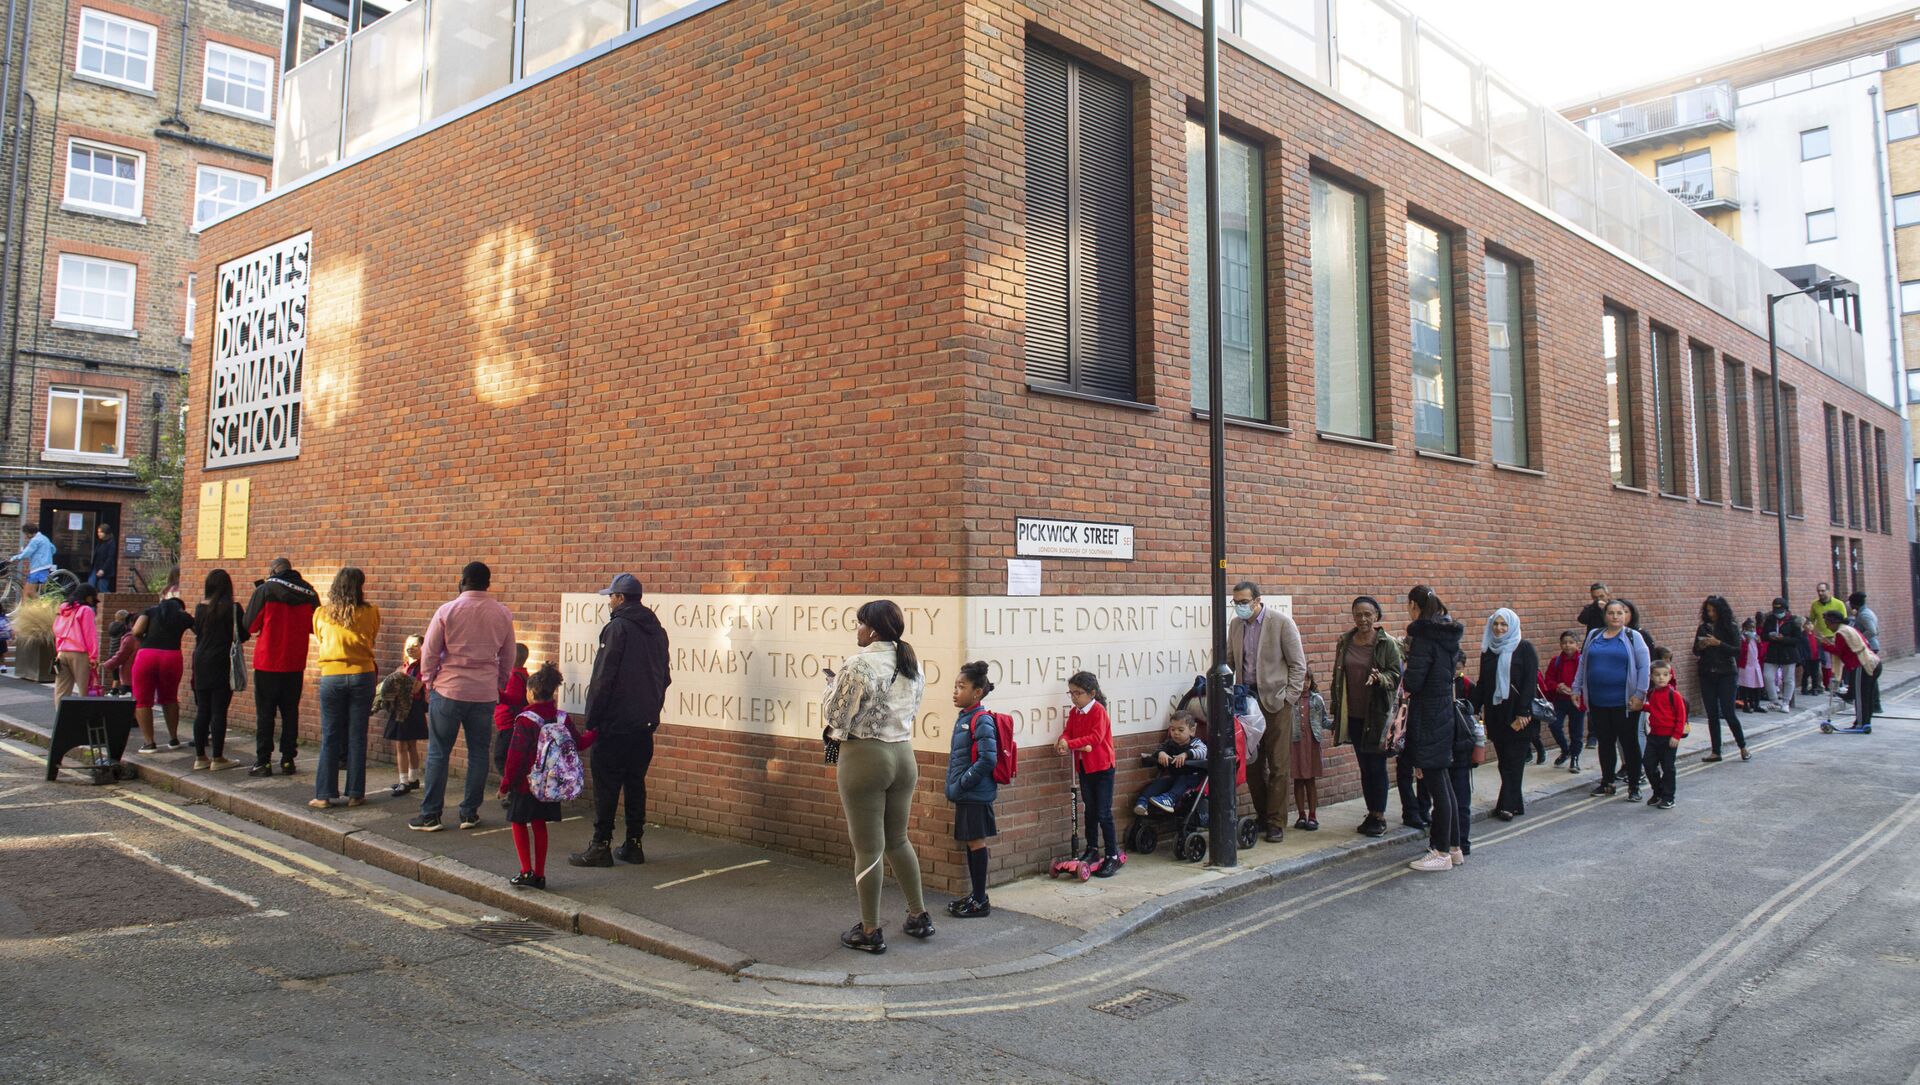 Pupils and parents queue on the first day back to school at Charles Dickens Primary School in London, Tuesday Sept. 1, 2020. Hundreds of thousands of British schoolchildren are heading back to classrooms, with the country watching nervously to see if reopening schools brings a surge in coronavirus infections. Tuesday marks the start of term for about 40% of schools in England and Wales, with the rest reopening in the coming days.  - Sputnik International, 1920, 25.02.2021